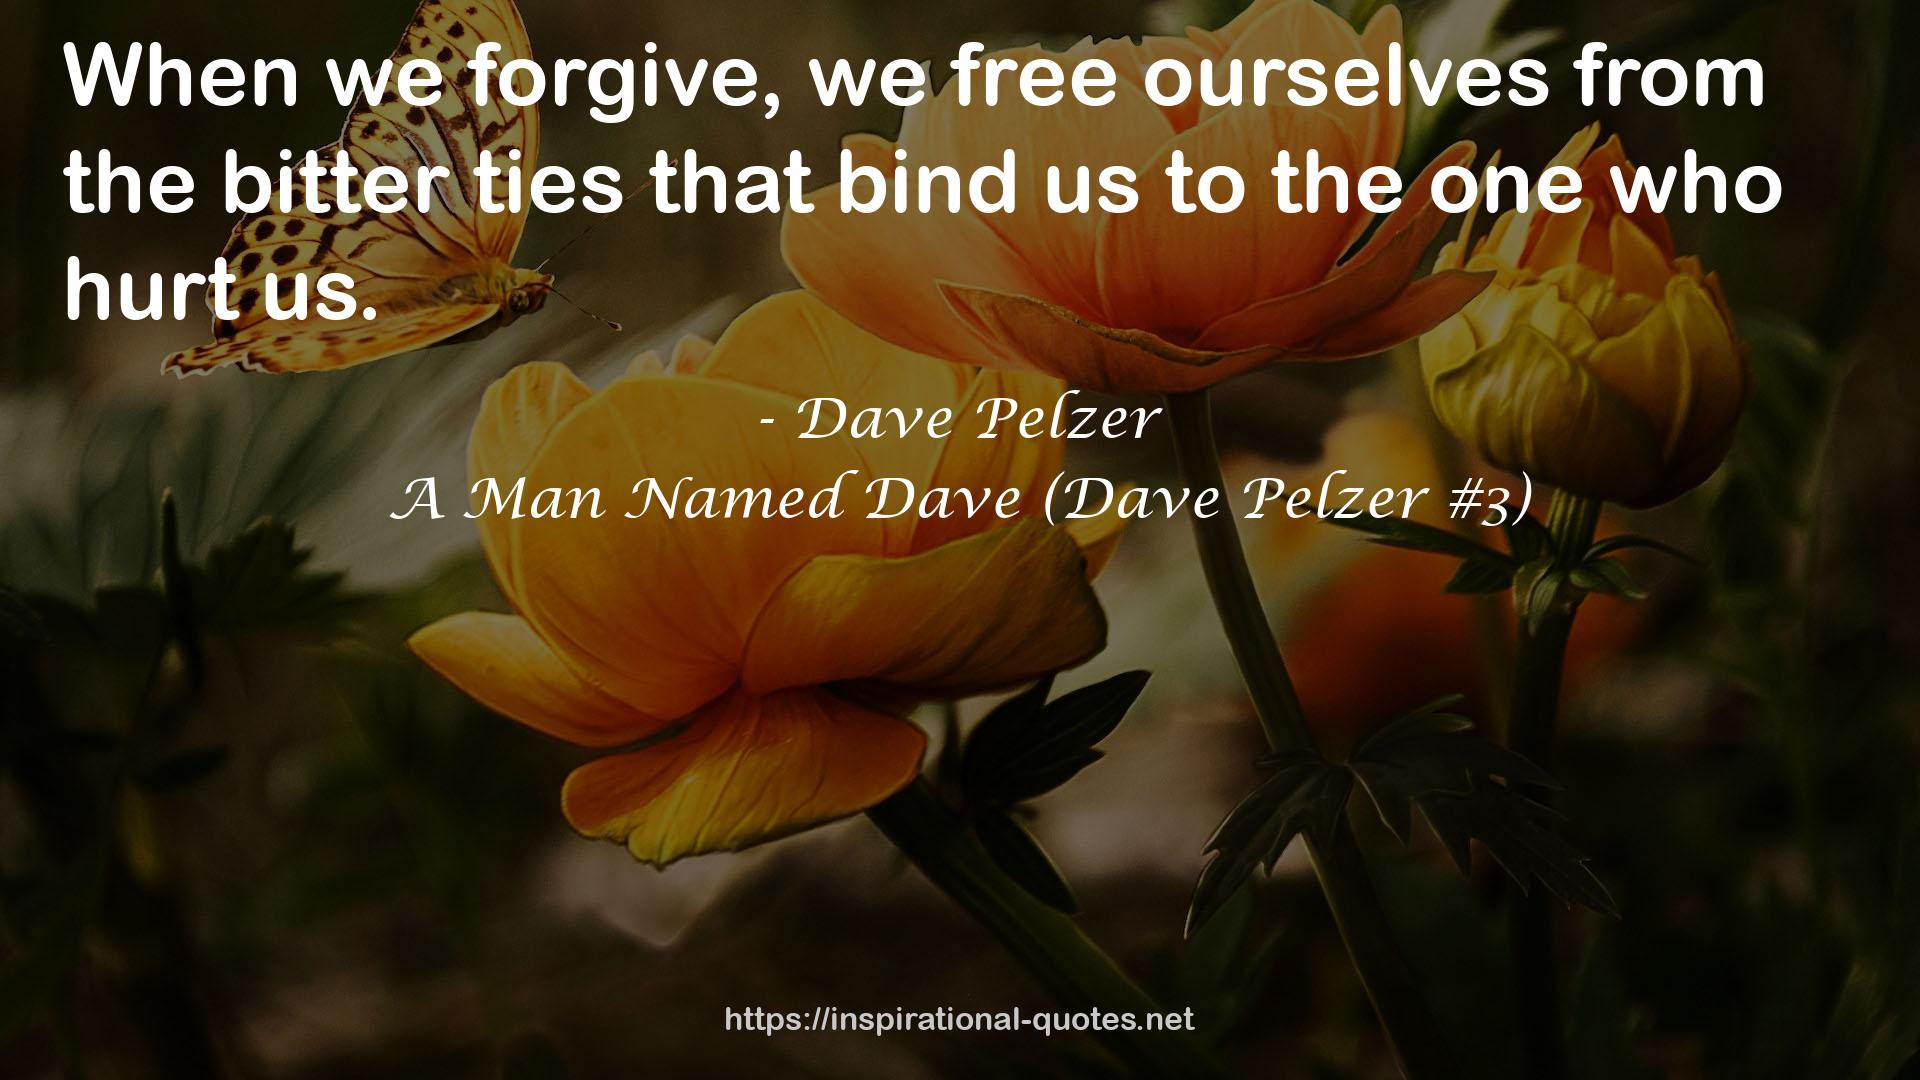 A Man Named Dave (Dave Pelzer #3) QUOTES